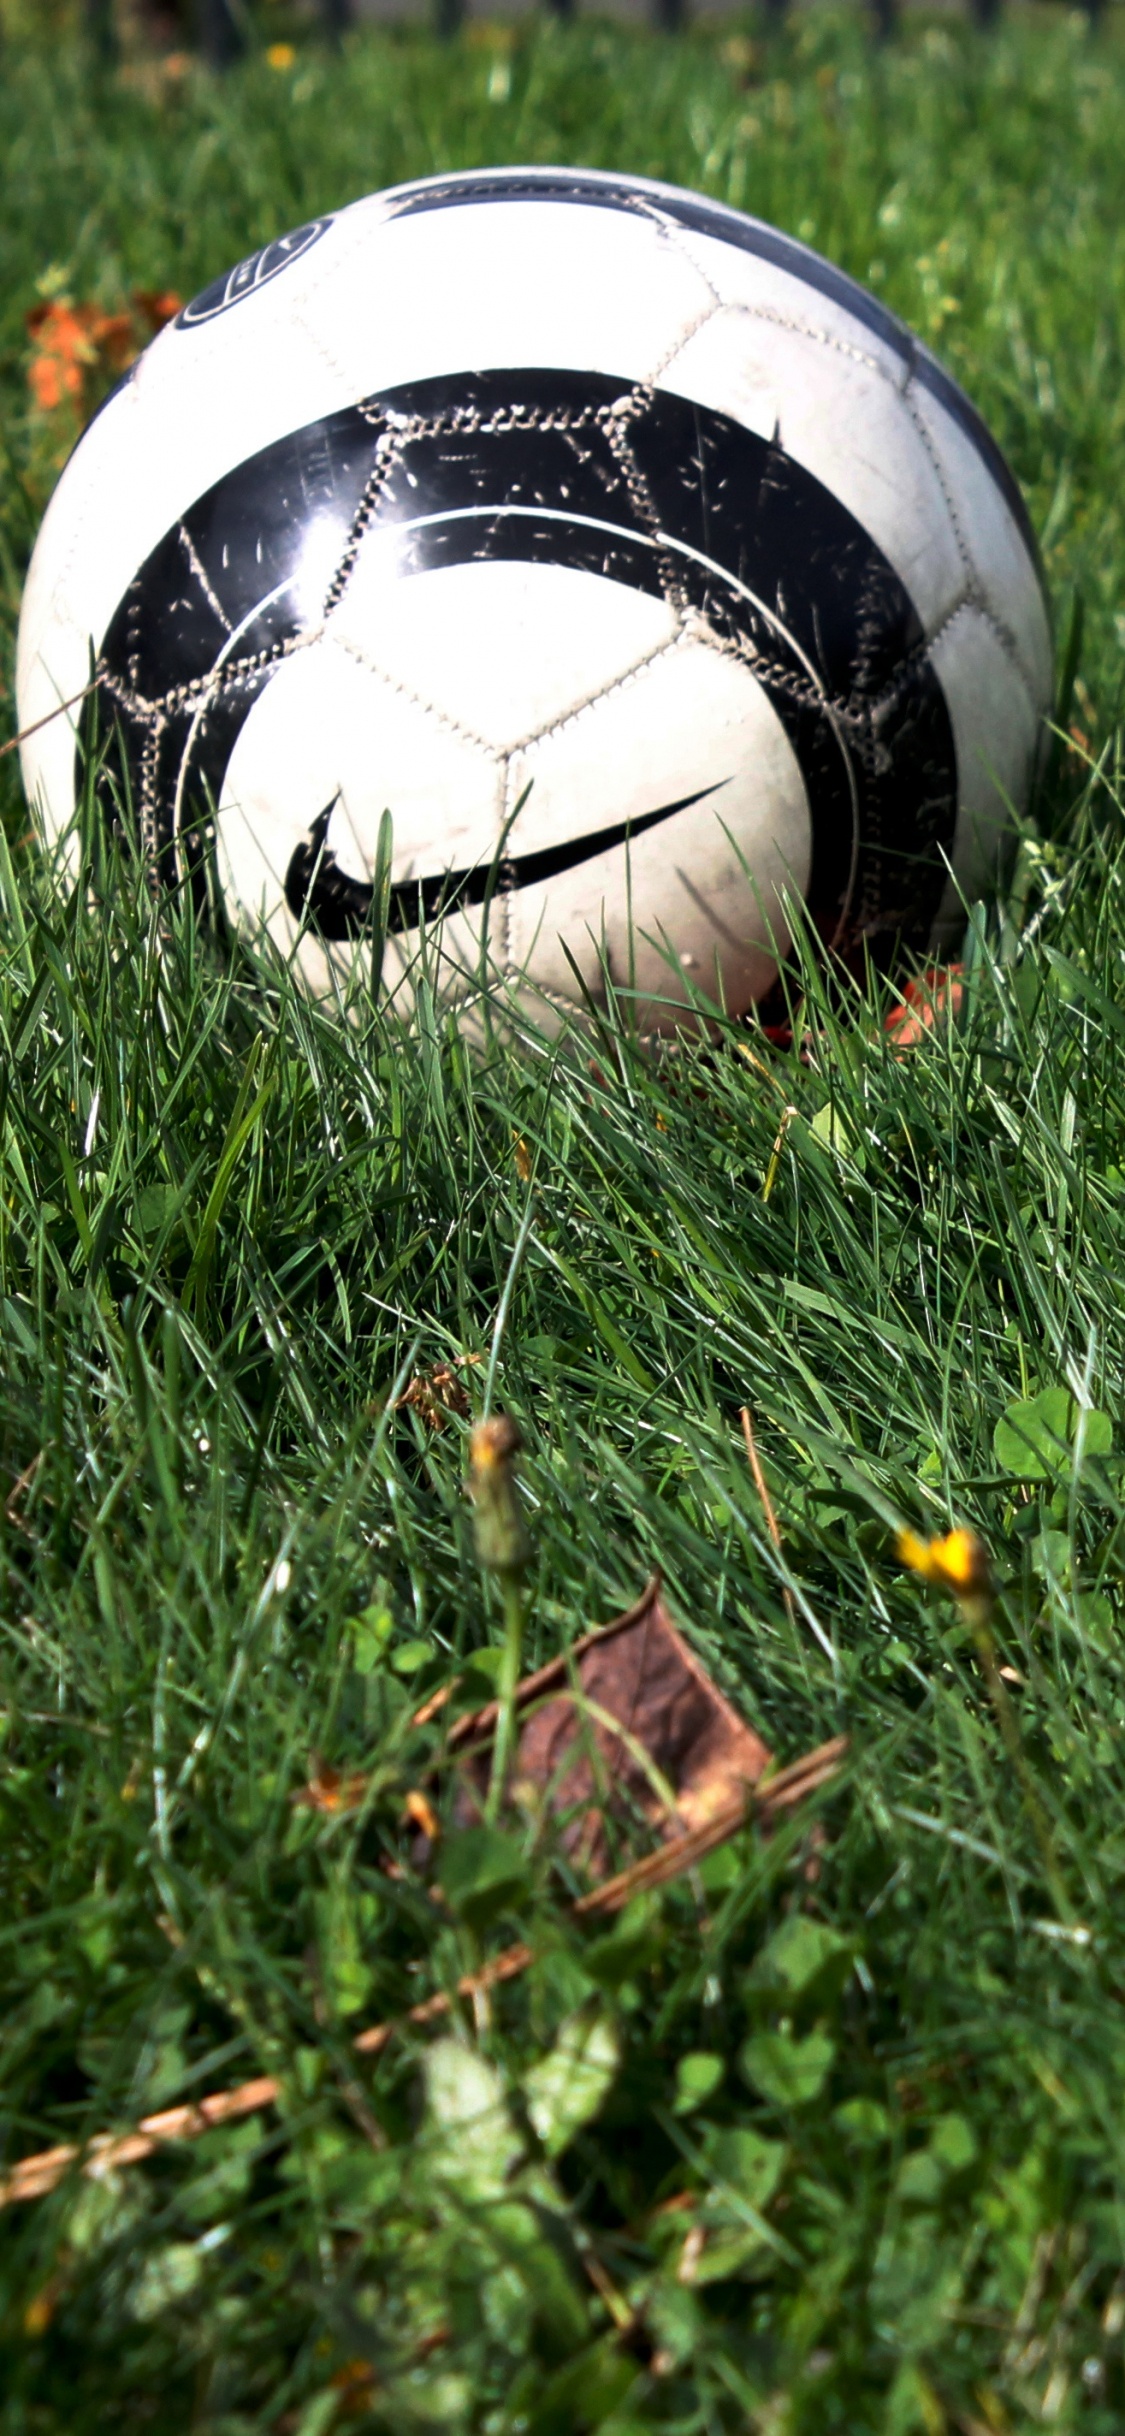 White and Black Soccer Ball on Green Grass Field. Wallpaper in 1125x2436 Resolution